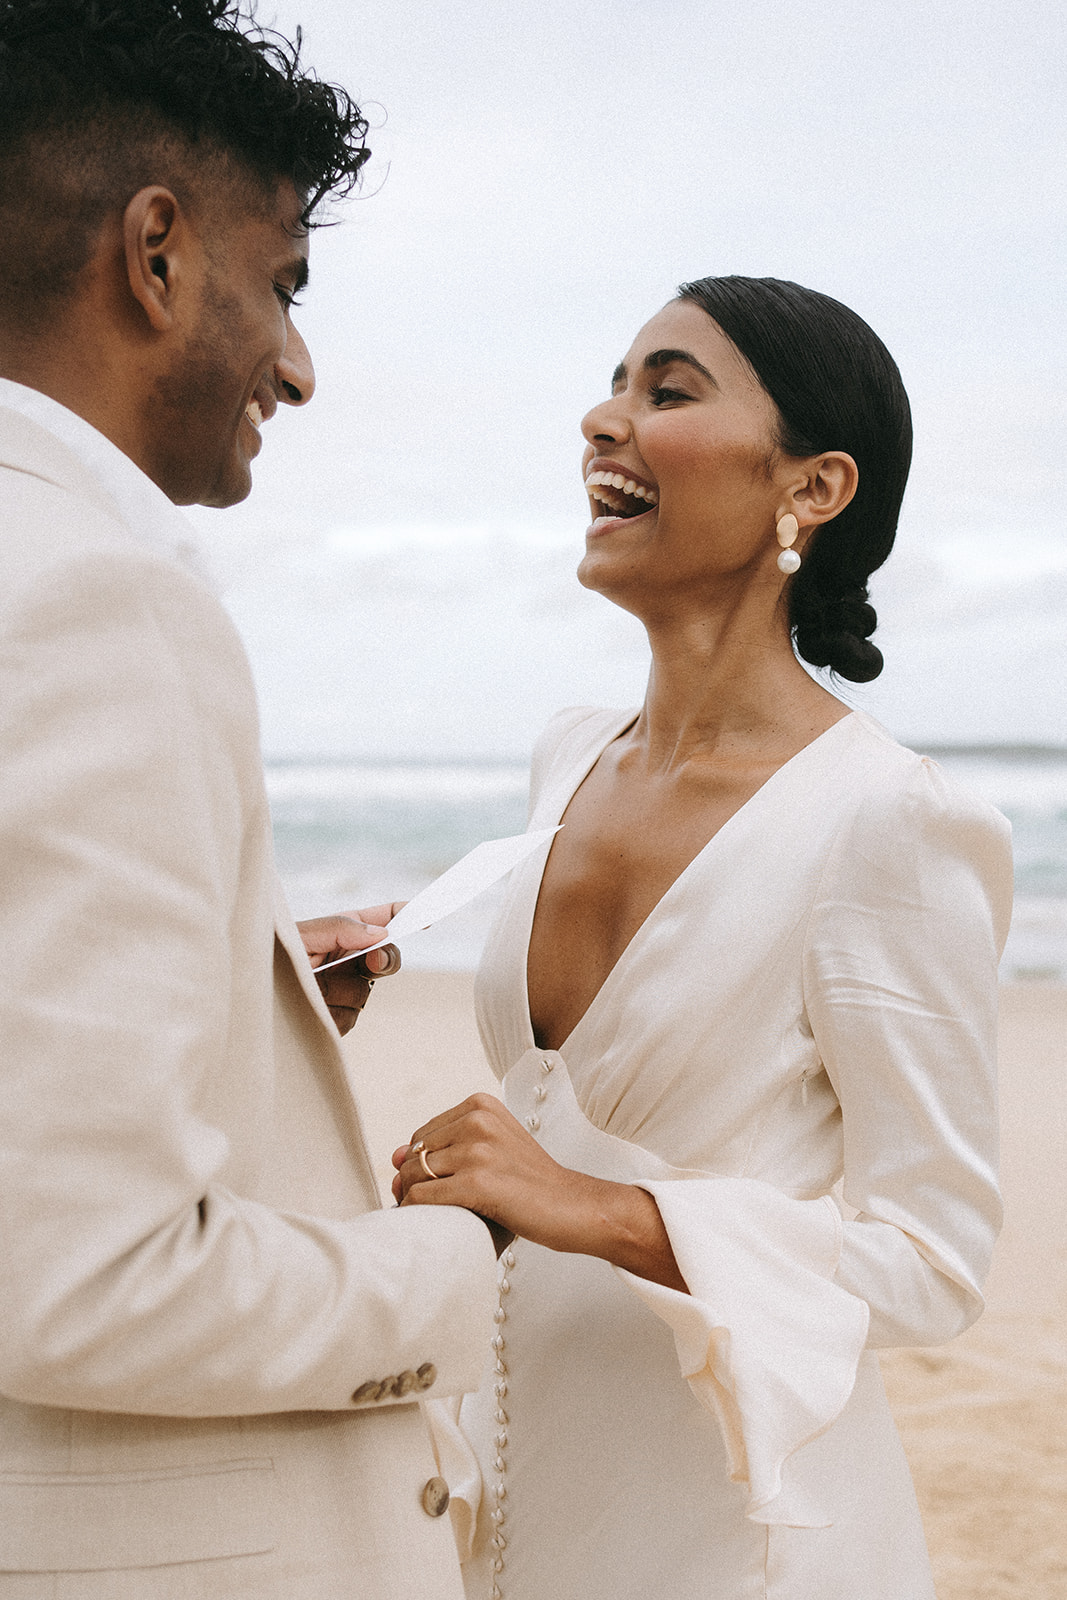 Emotional modern beach elopement. Modern wedding photography by Claire Coulthard Photography